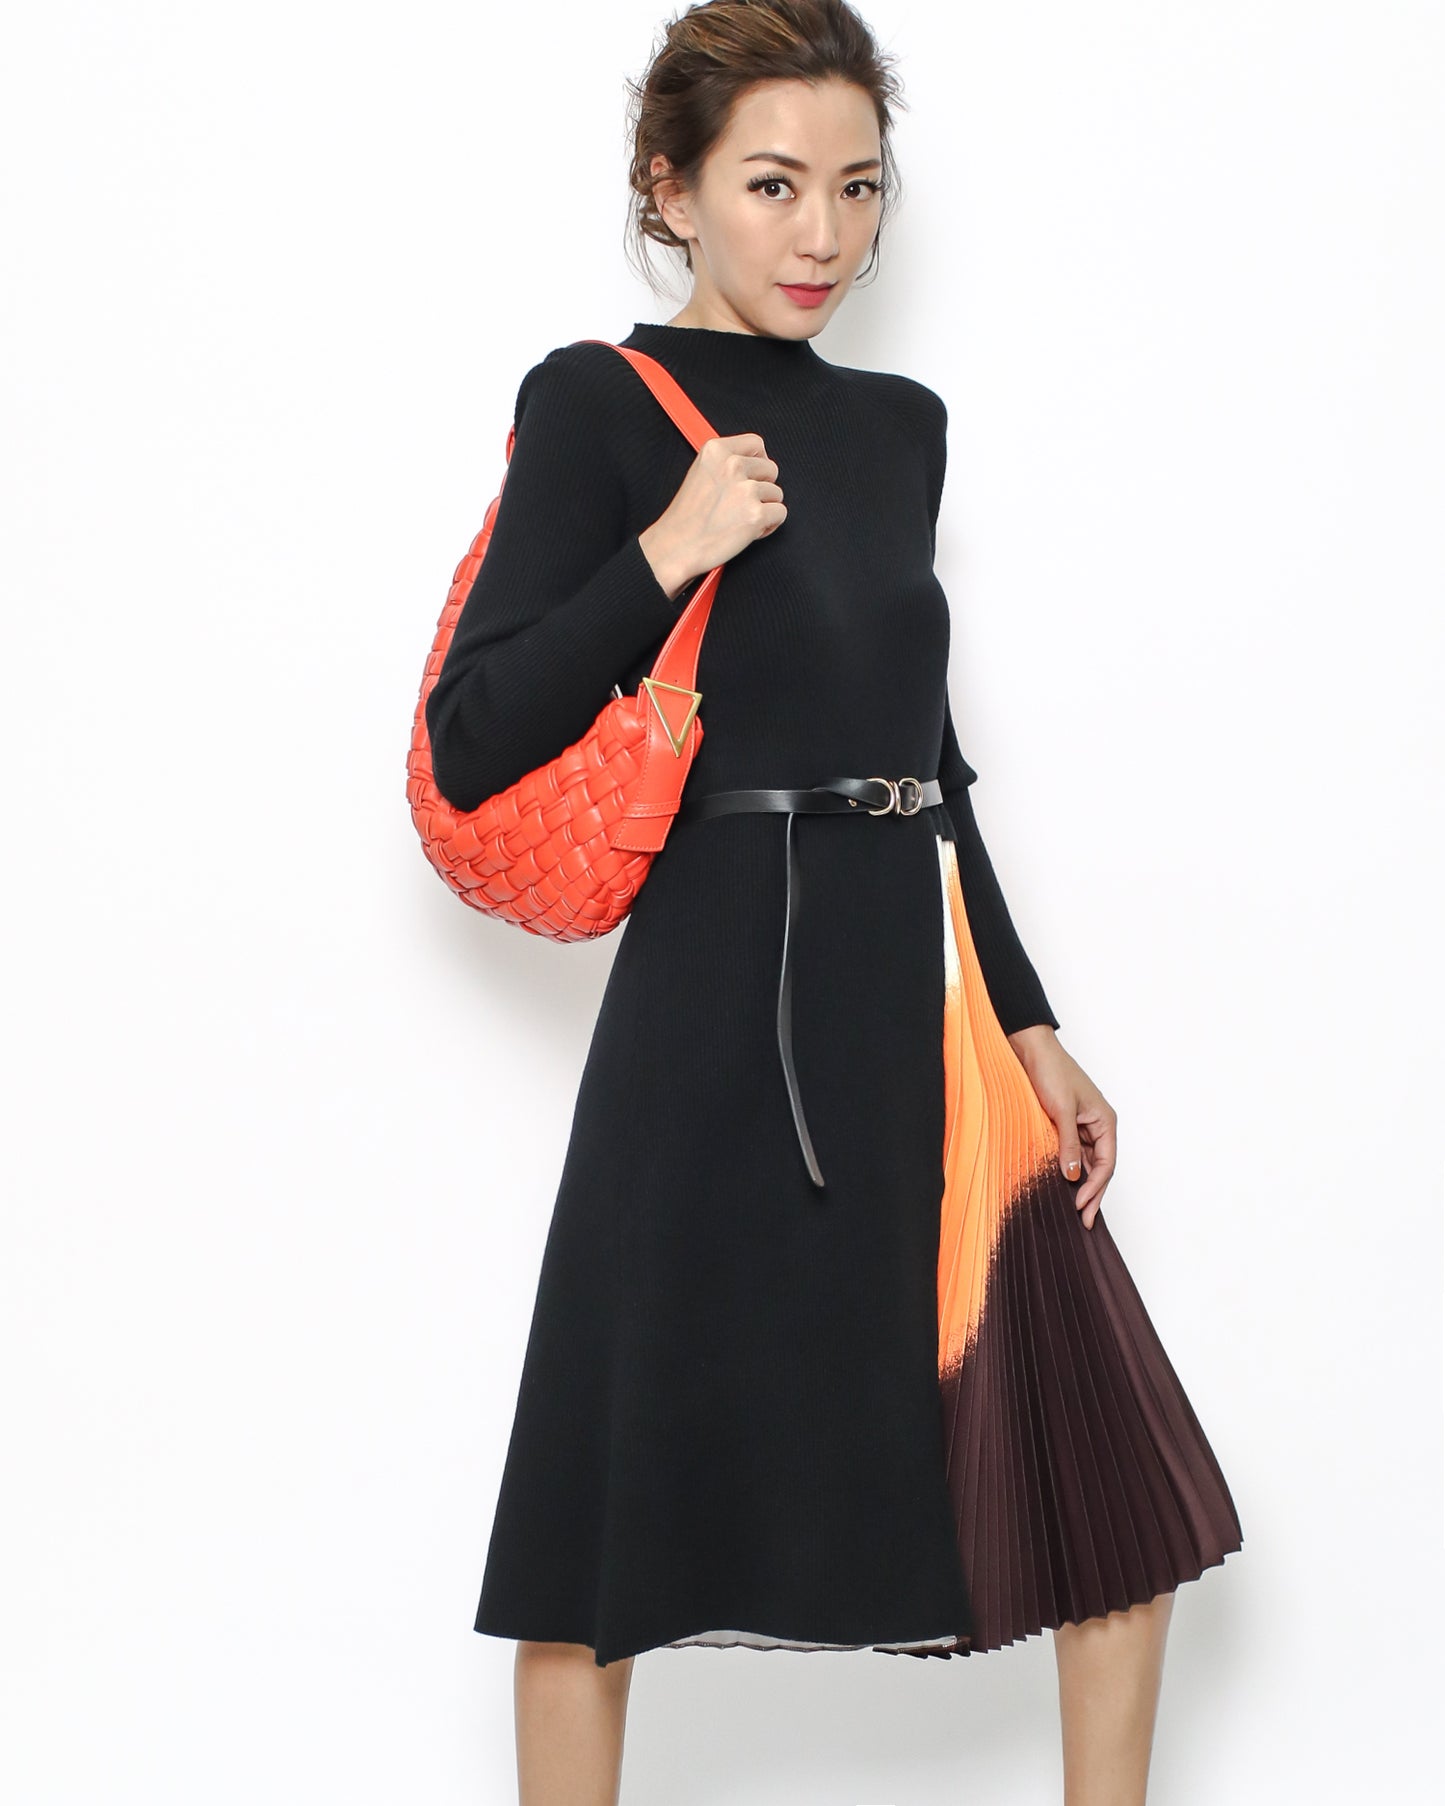 black knitted & colourful pleats dress with belt *pre-order*